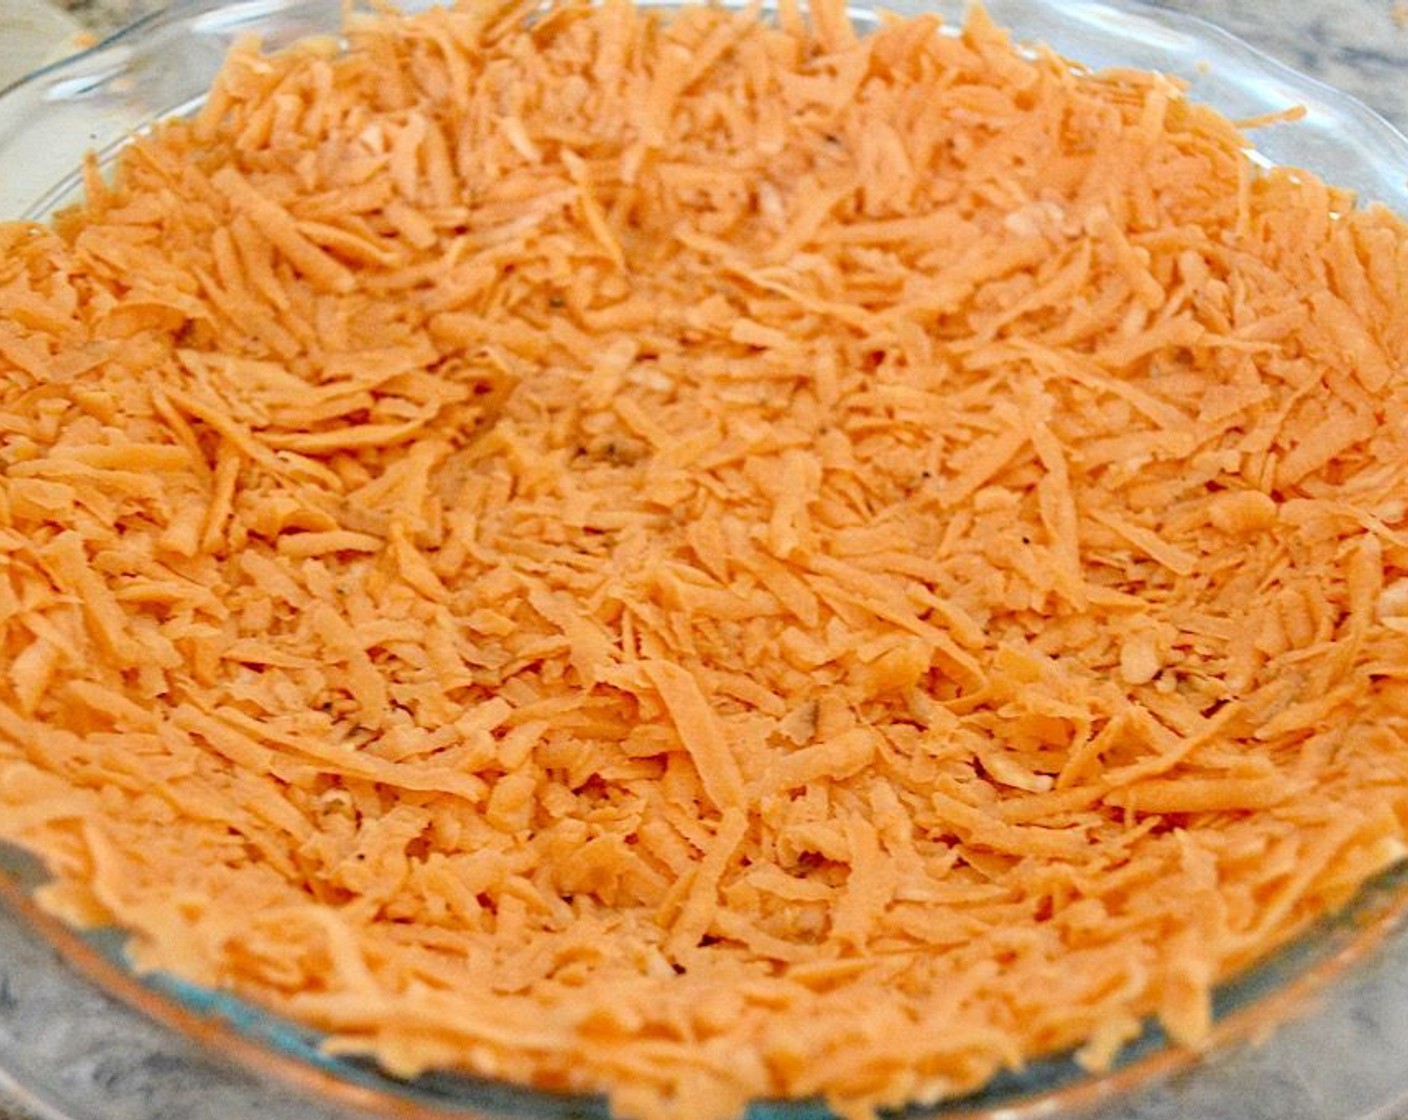 step 2 Toss the Sweet Potatoes (5) with Salt (1 pinch), Ground Black Pepper (1 pinch), and McCormick® Garlic Powder (1 pinch). Press it into the greased pan firmly, including up the sides, to form a crust.